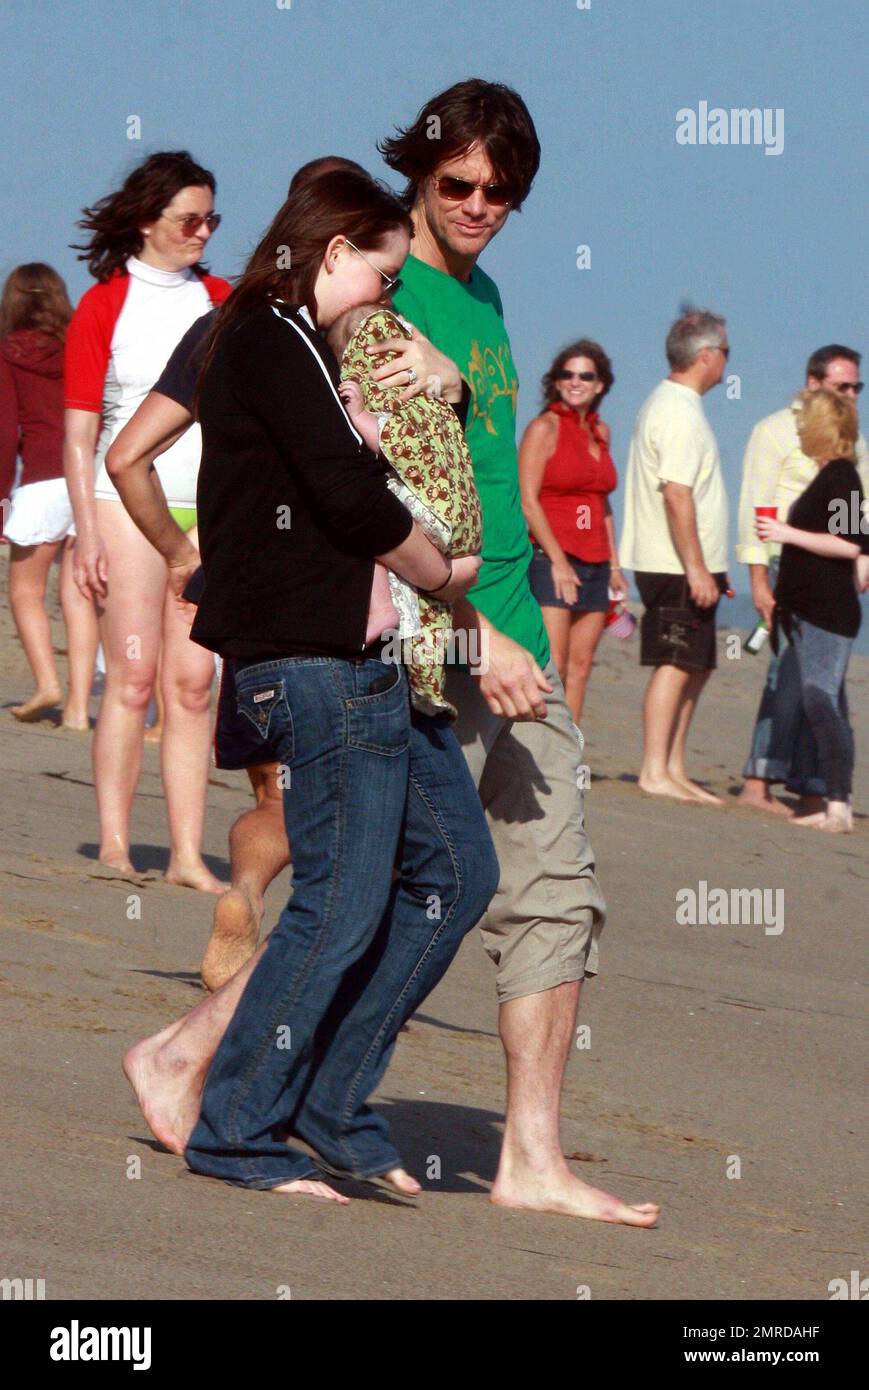 Jim Carrey celebrates the Fourth of July by hosting a beach party at his home. Carrey's daughter Jane brought his new grandson Riley Santana, who Jim showed off to guests that included Lisa Kudrow among other celebs. Malibu, CA. 7/4/10.   . Stock Photo